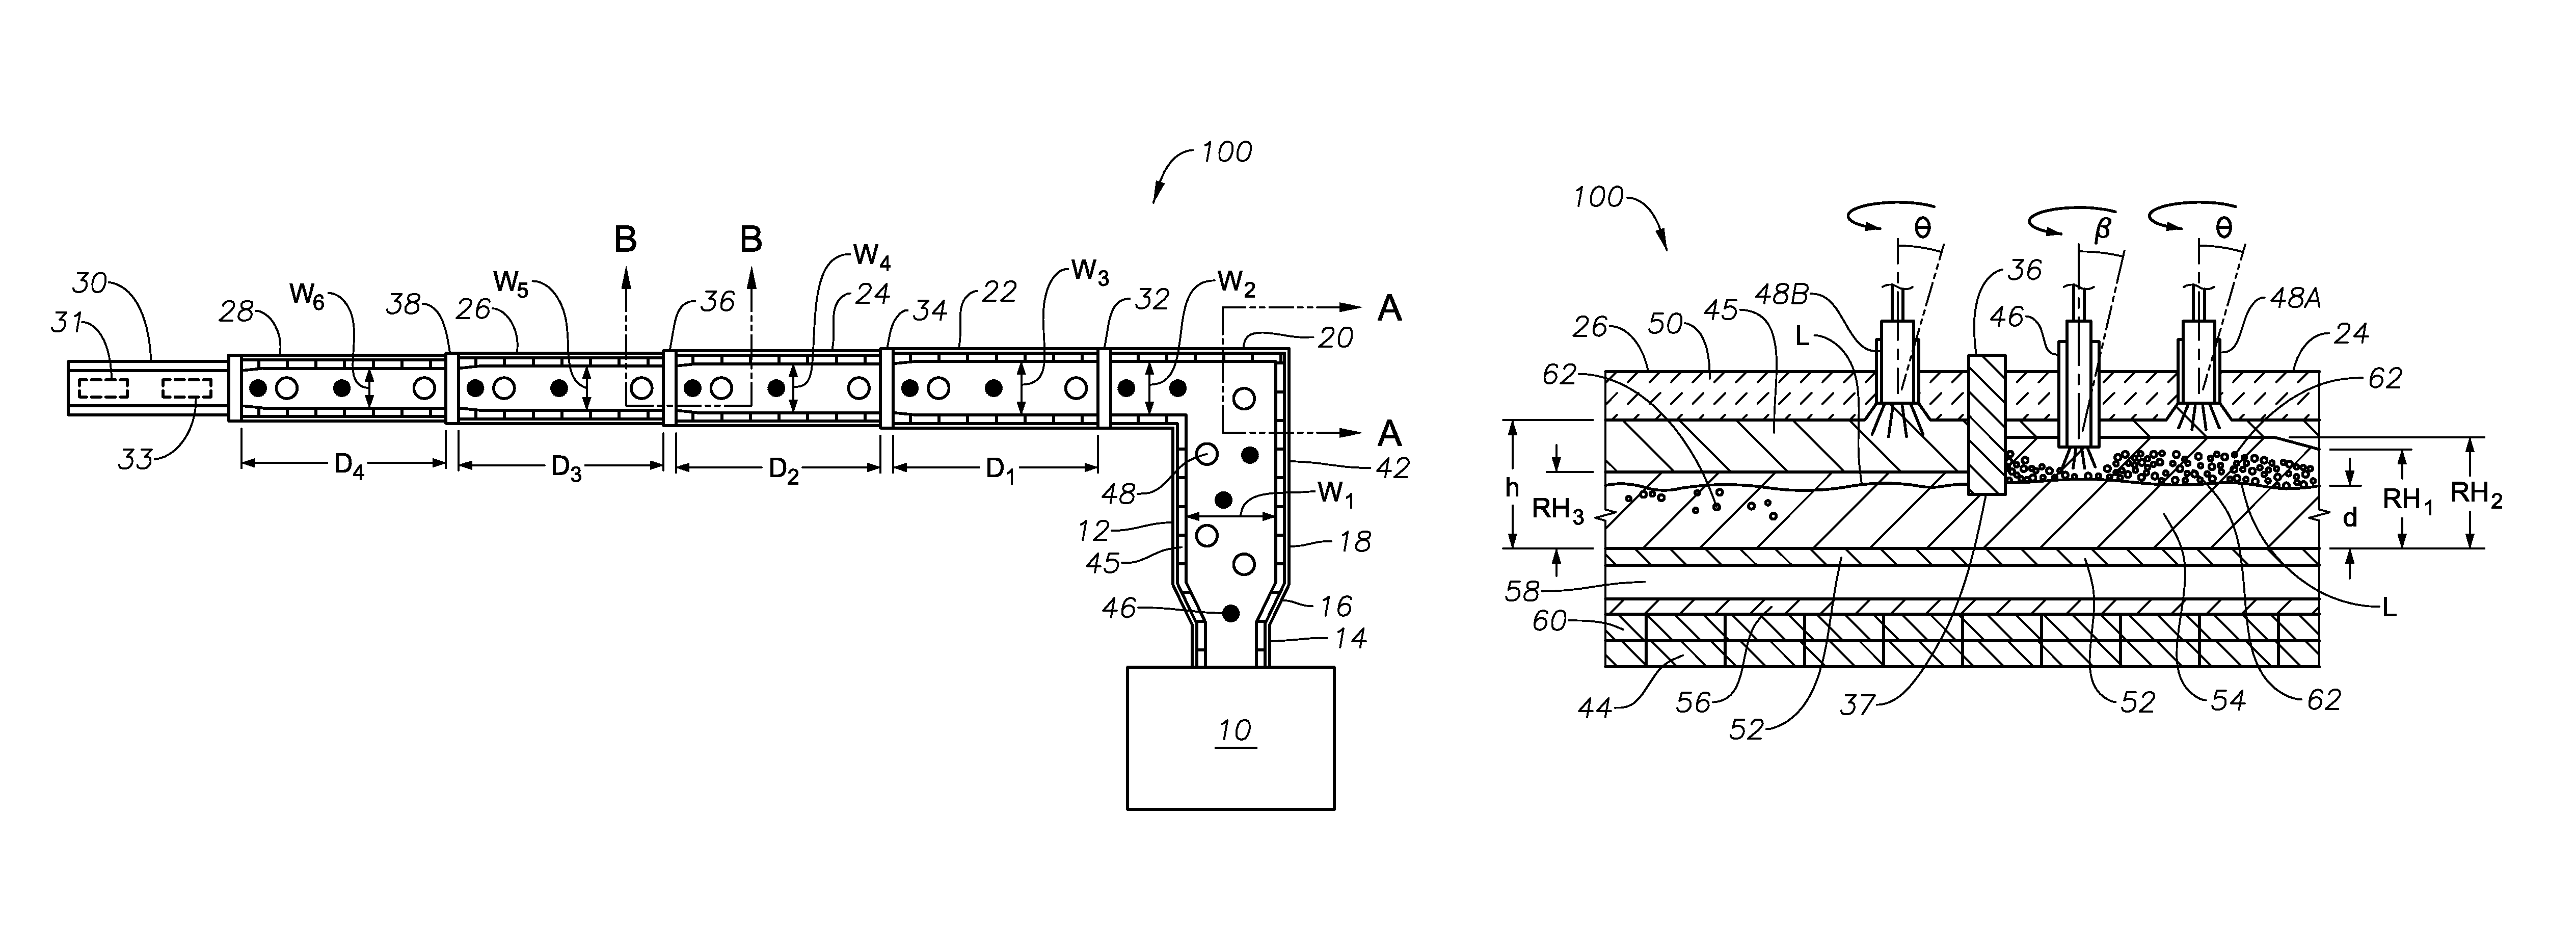 Apparatus, systems and methods for conditioning molten glass